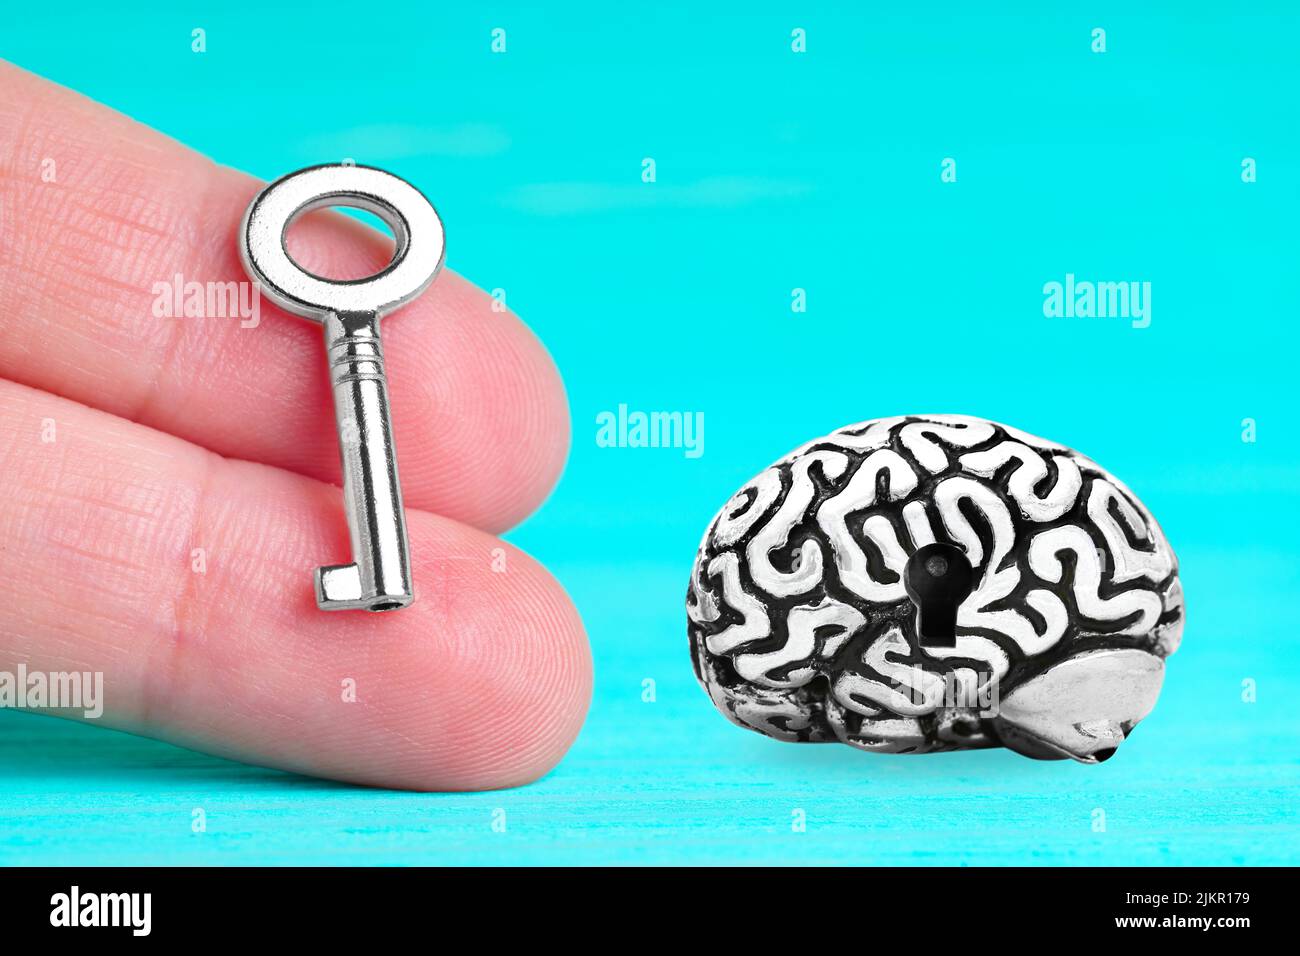 Anatomical copy of a human brain having a keyhole and a small master key in hand isolated on blue background. Unlock secrete power of the brain. Stock Photo